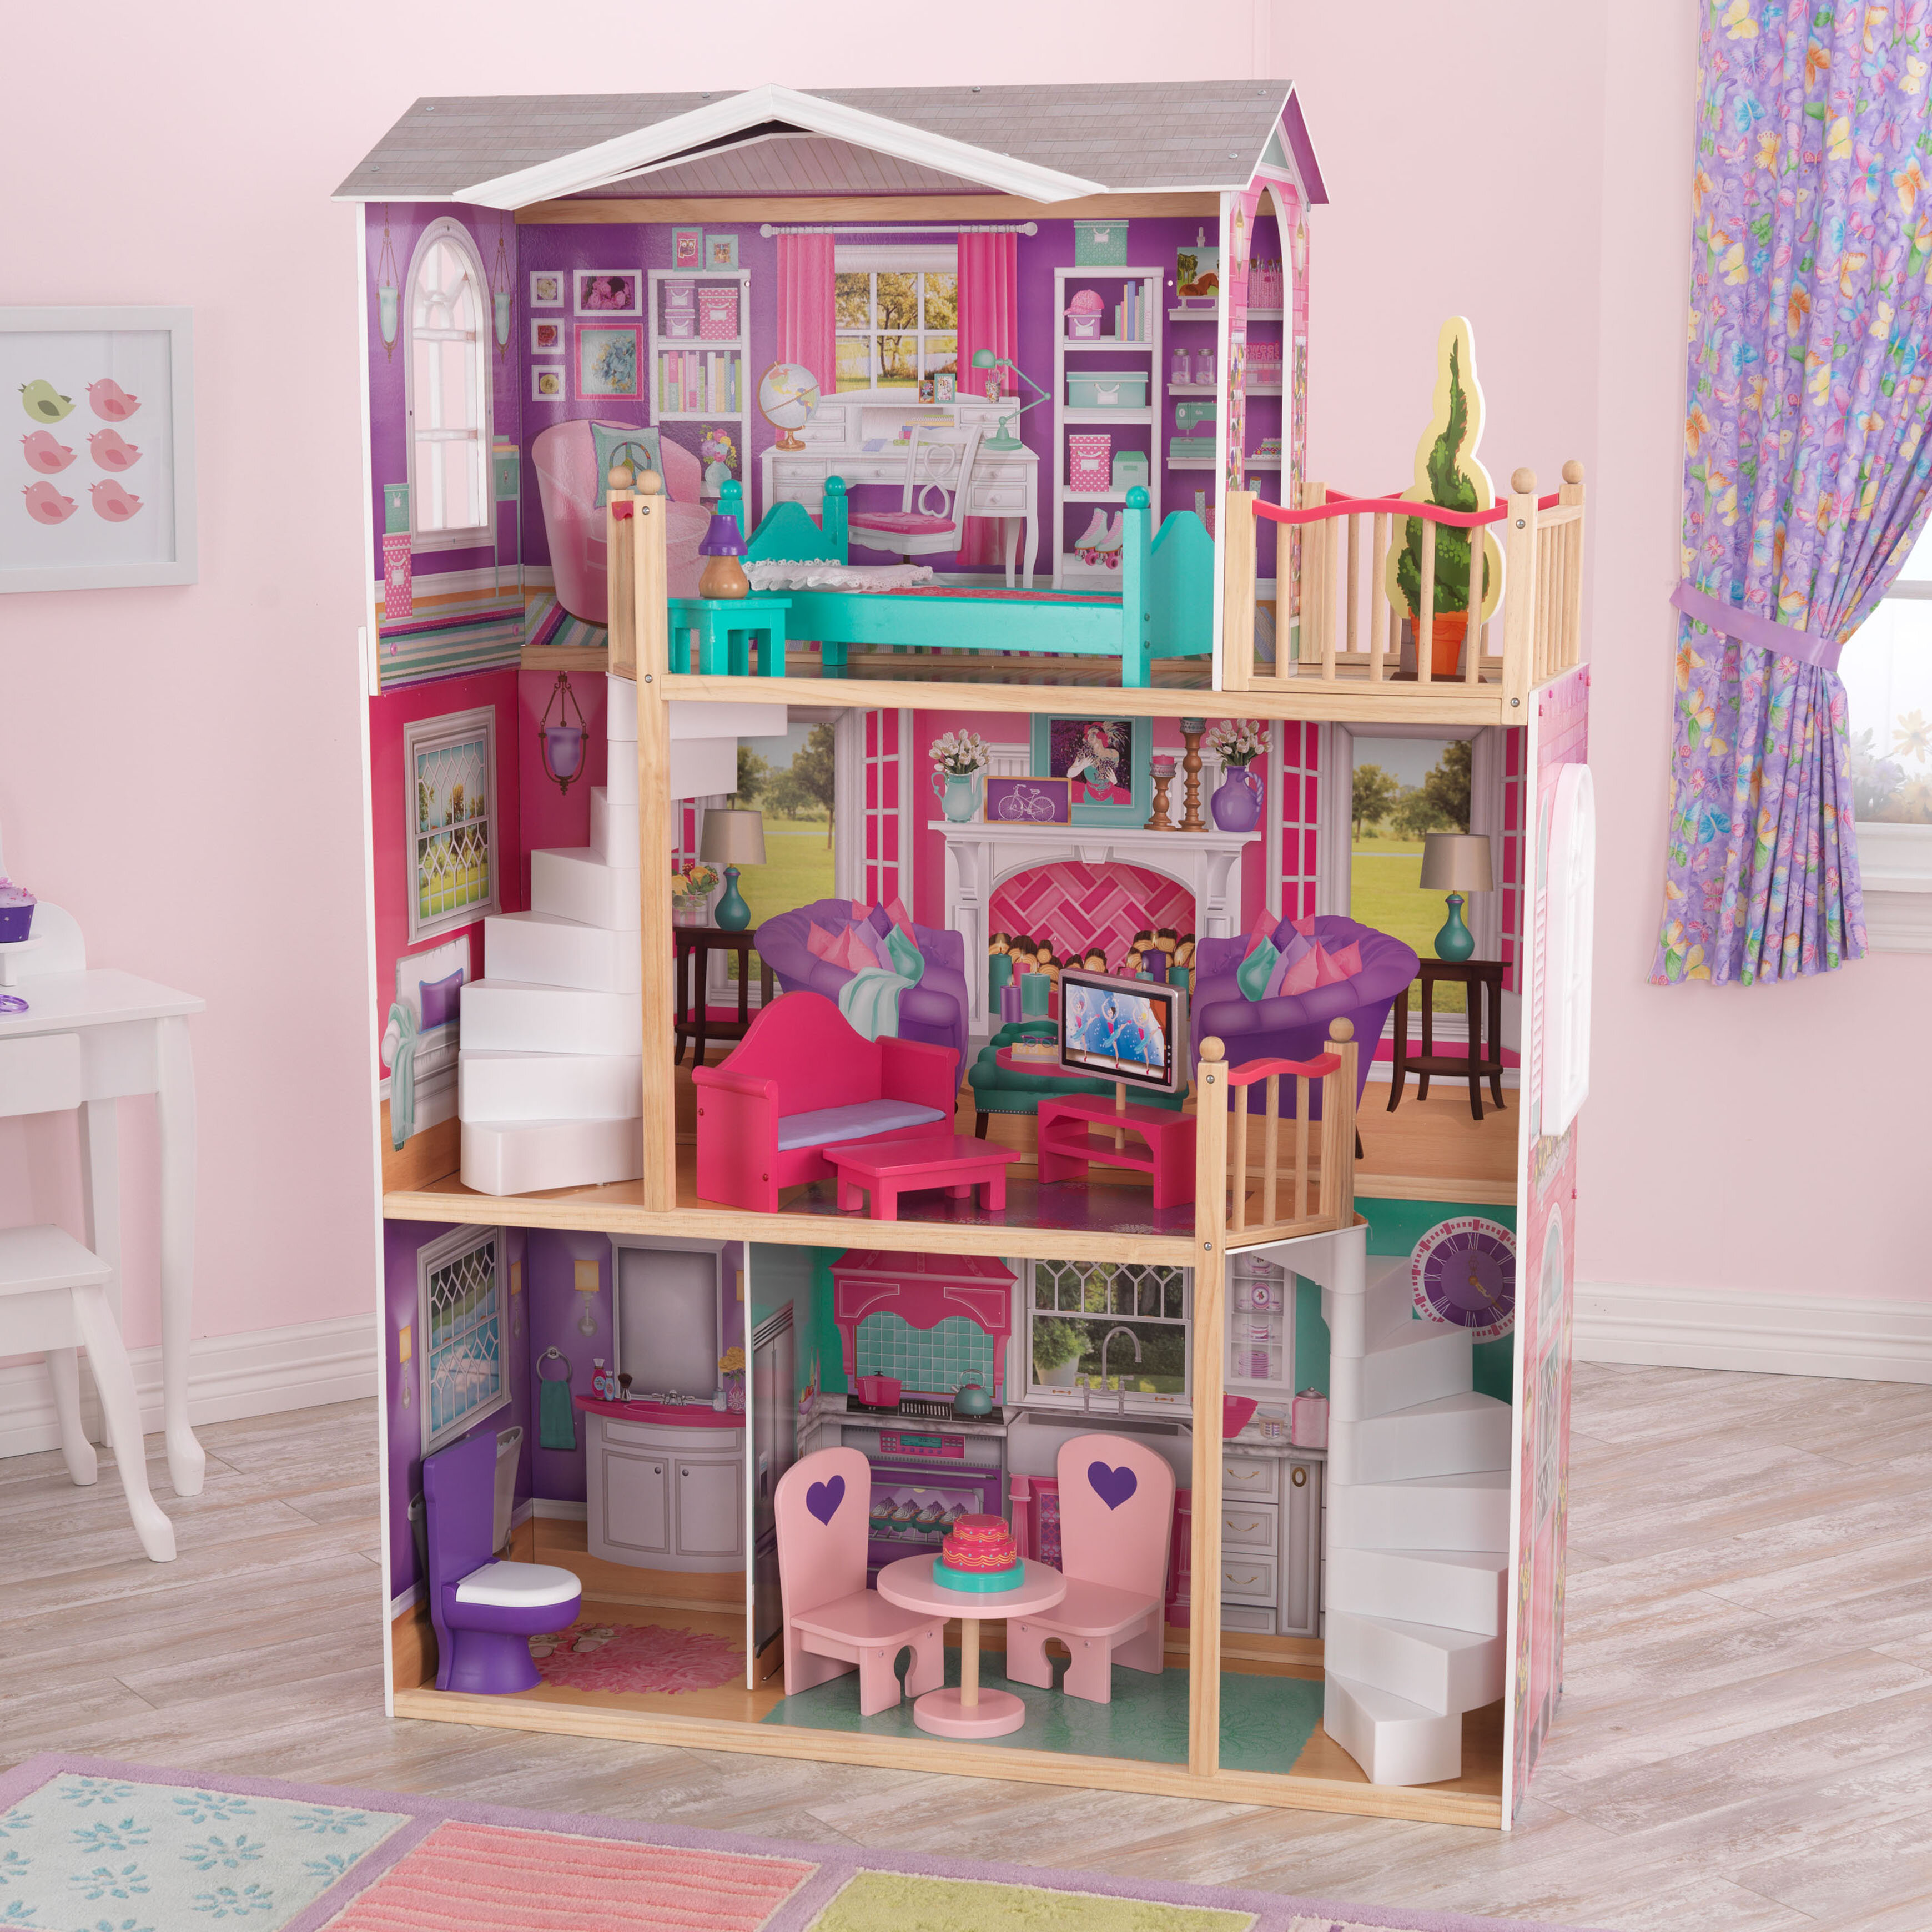 Multi-Platform Children's Wooden Dollhouse with Patio and Furniture Pink 